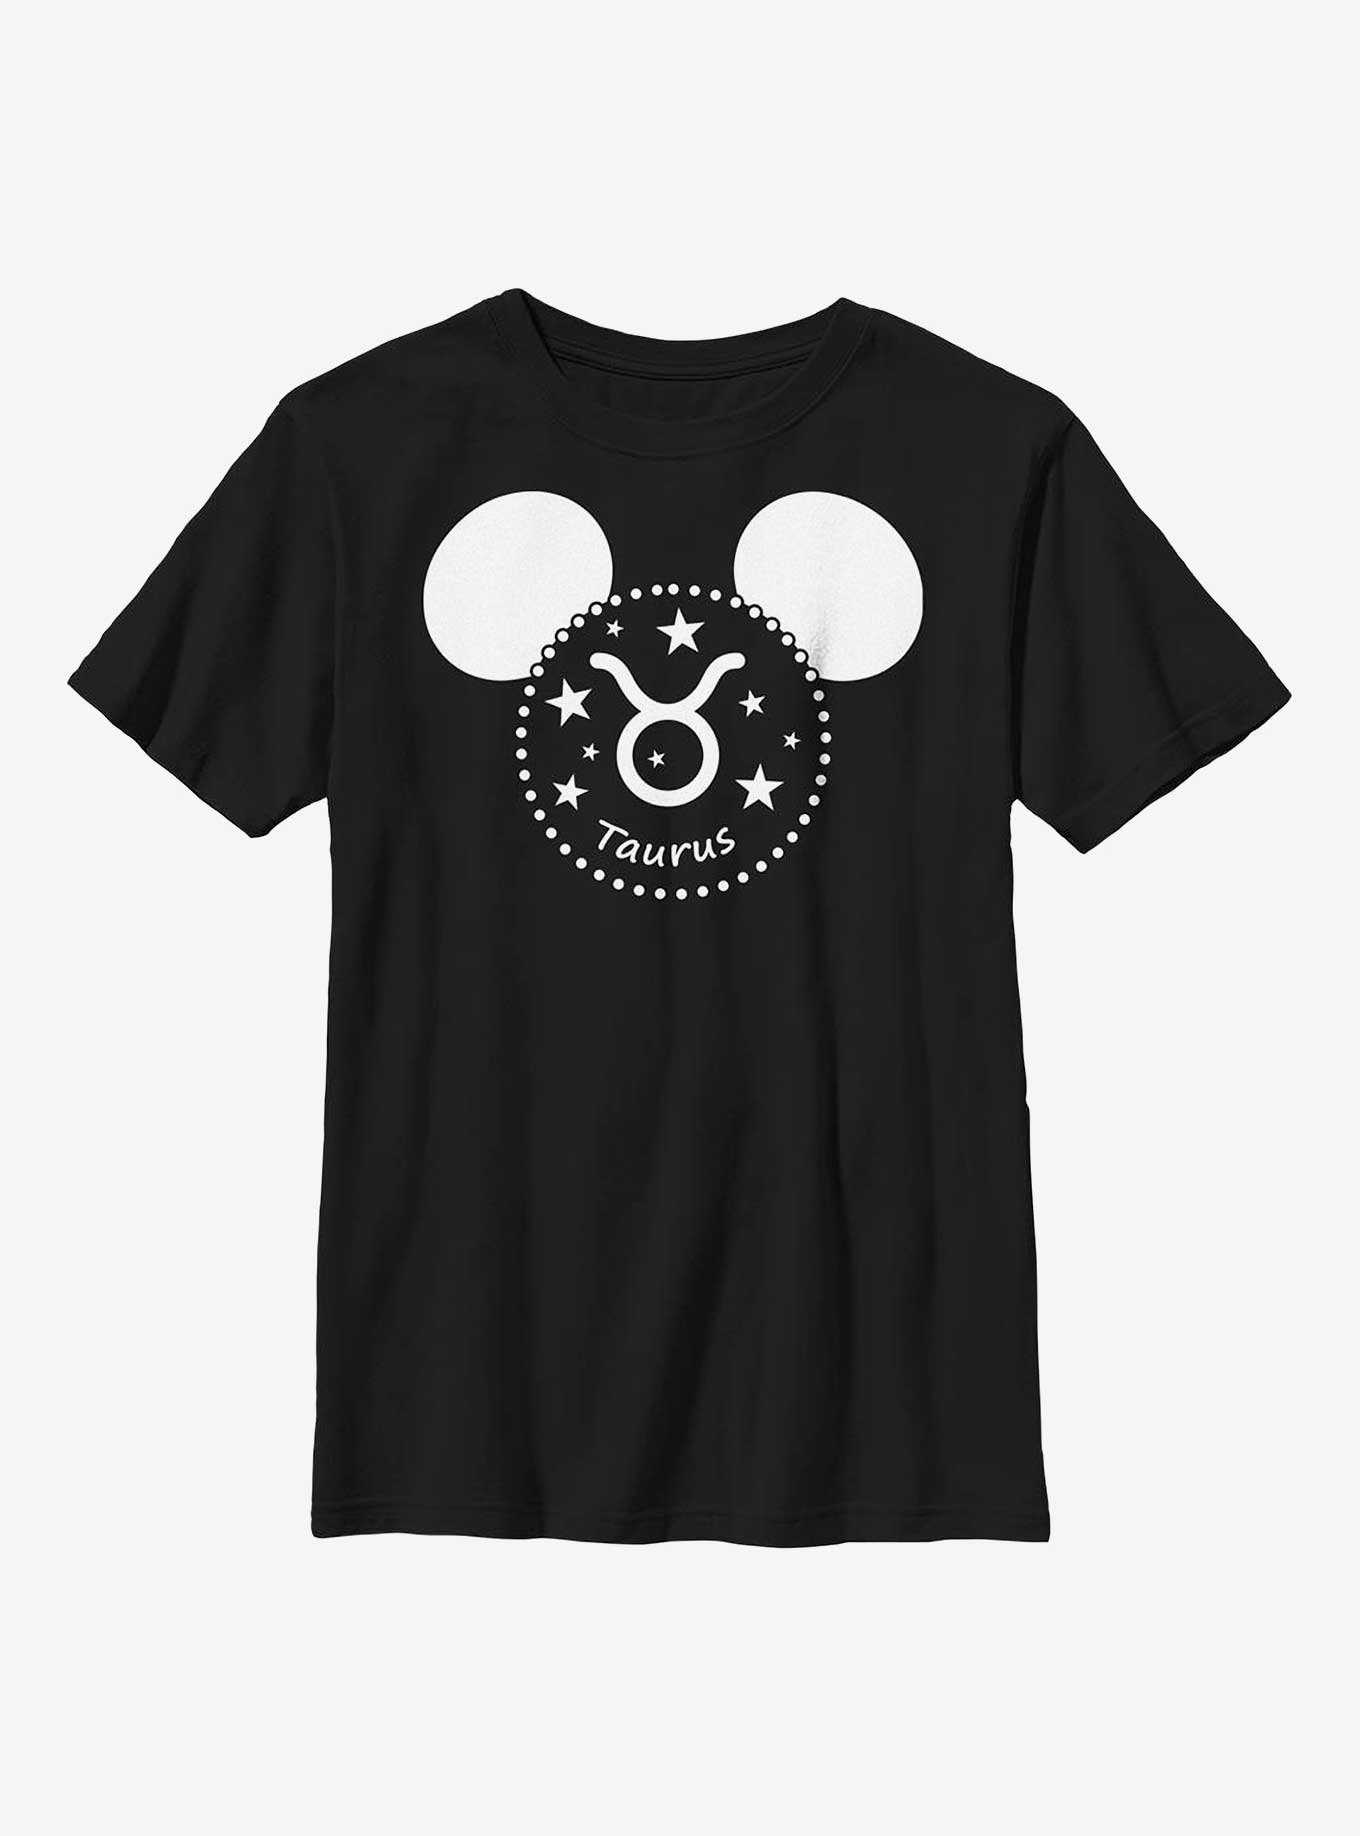 Disney Mickey Mouse Taurus Ears Youth T-Shirt, , hi-res